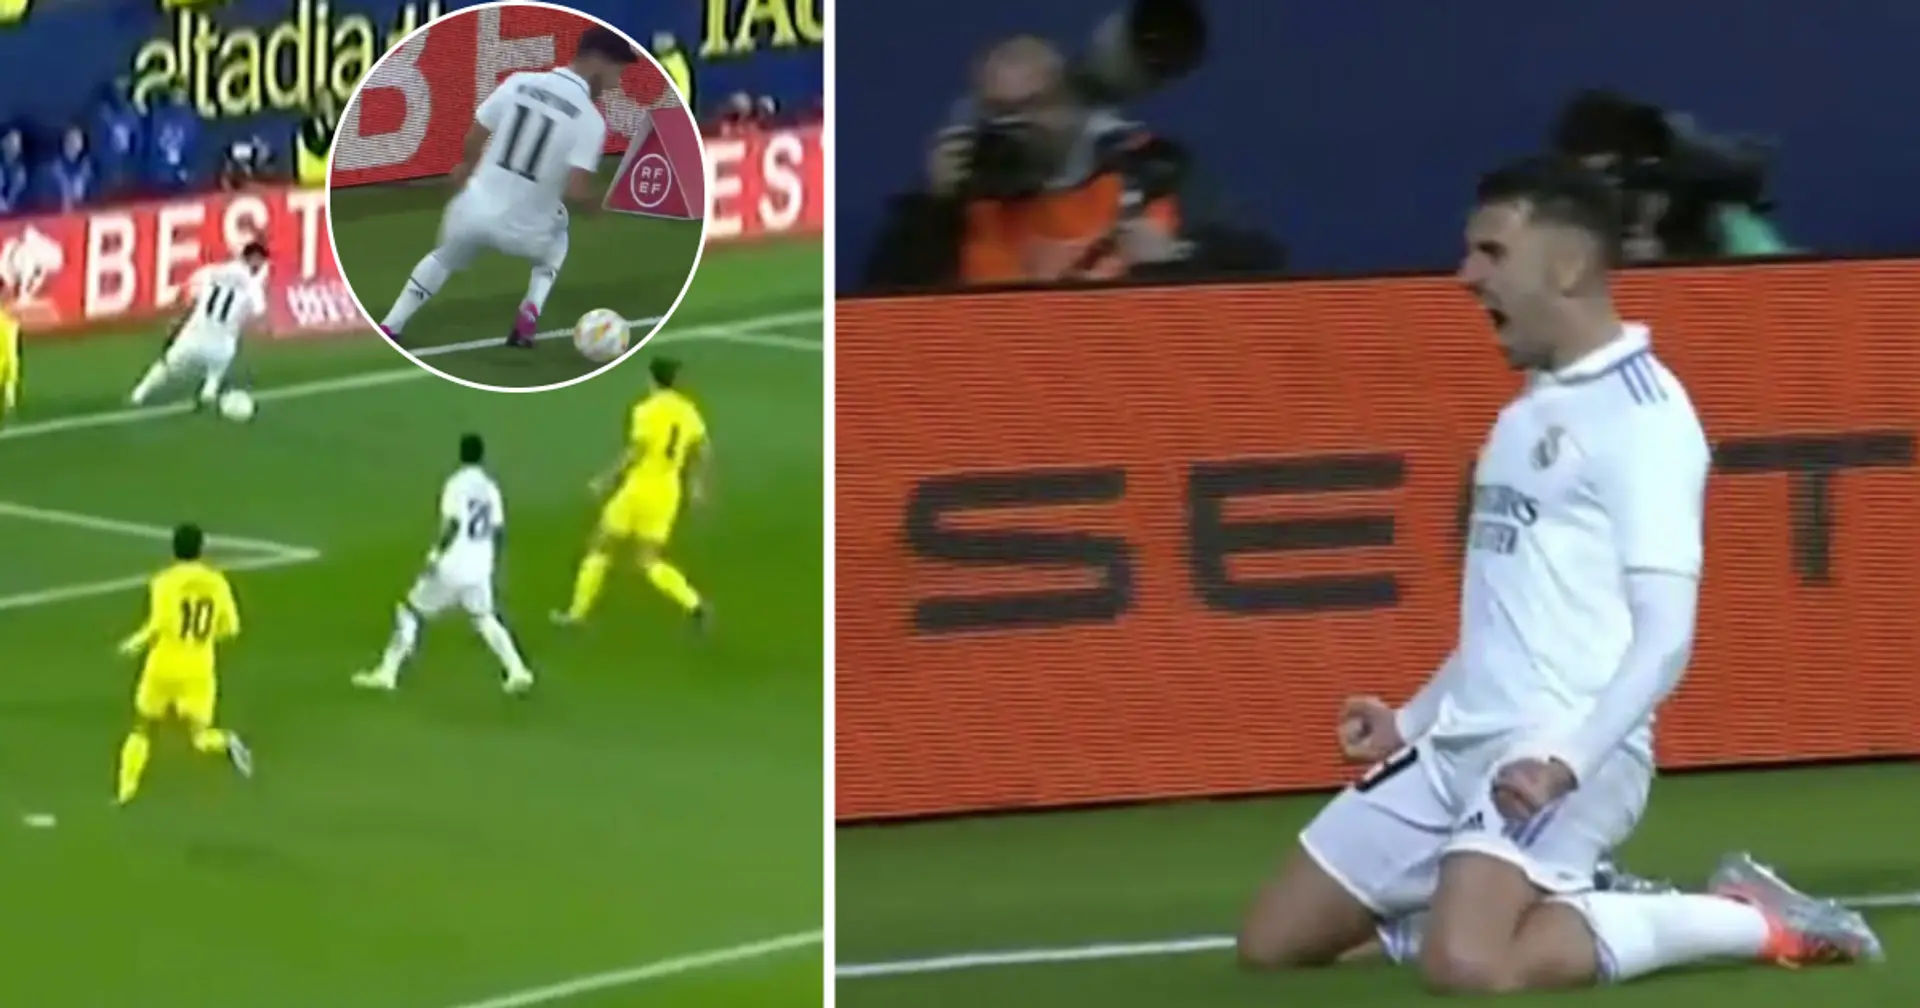 'Didn't fully realize how great it was': What's so special about Madrid's third goal v Villarreal -- shown in pics